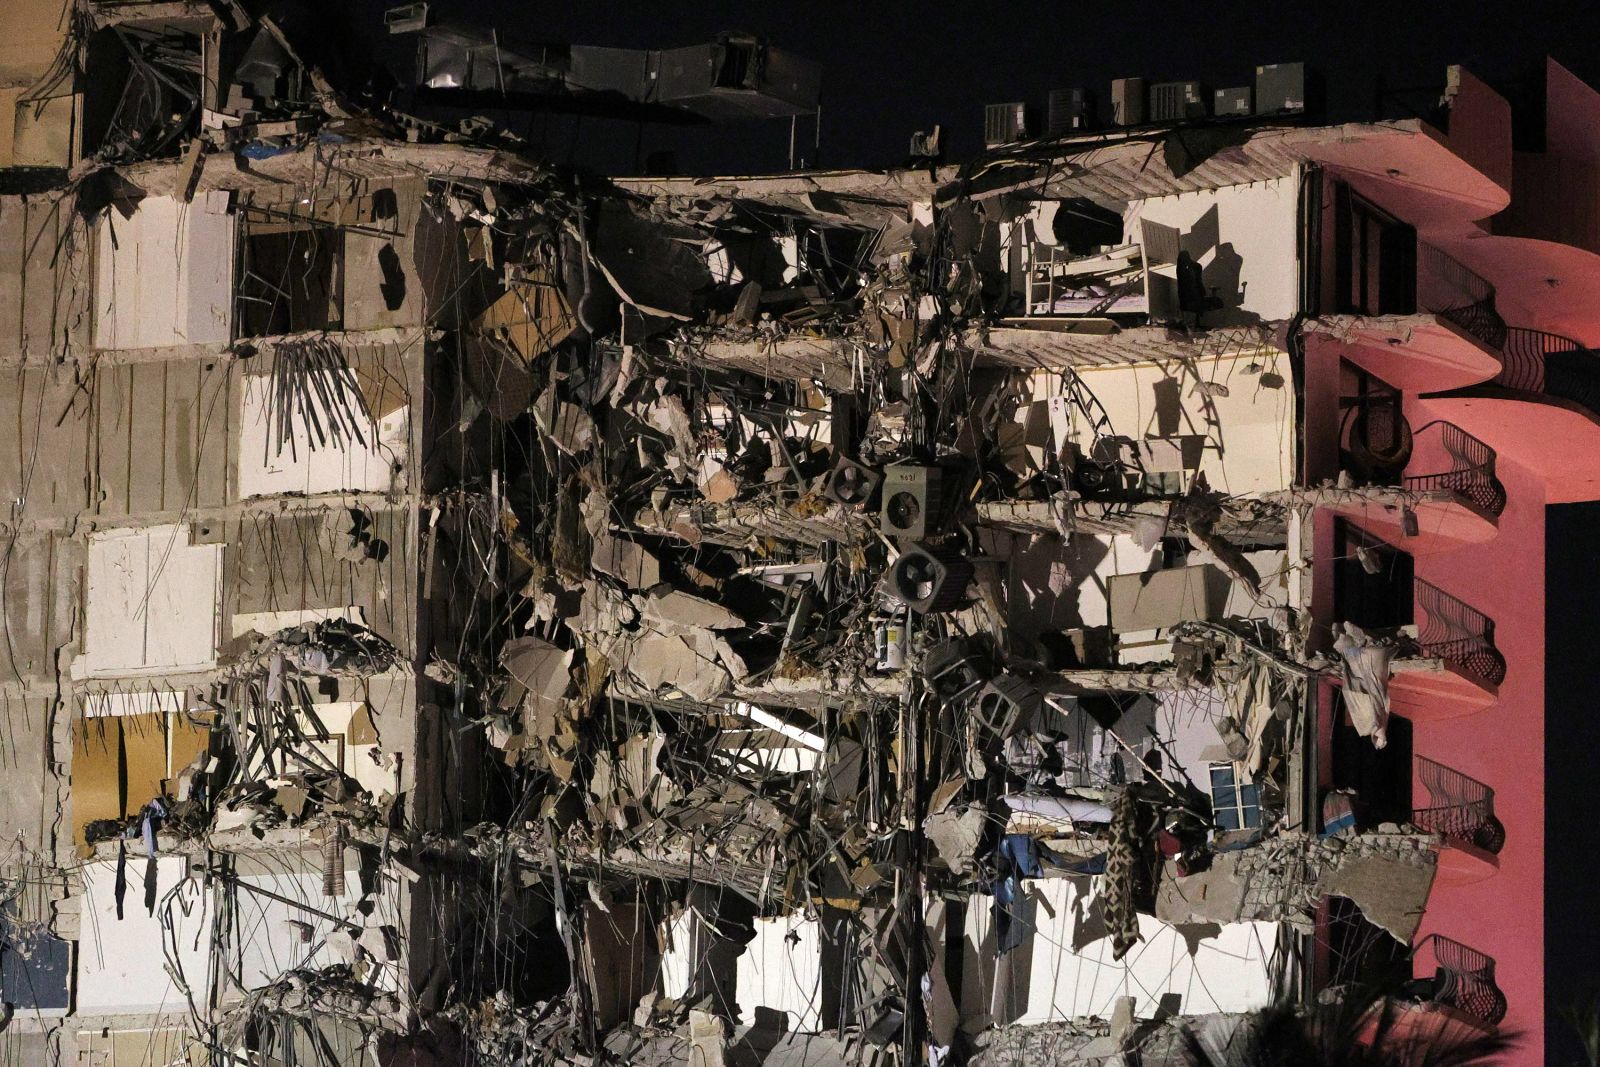 A portion of the multistory building crumbled to the ground.